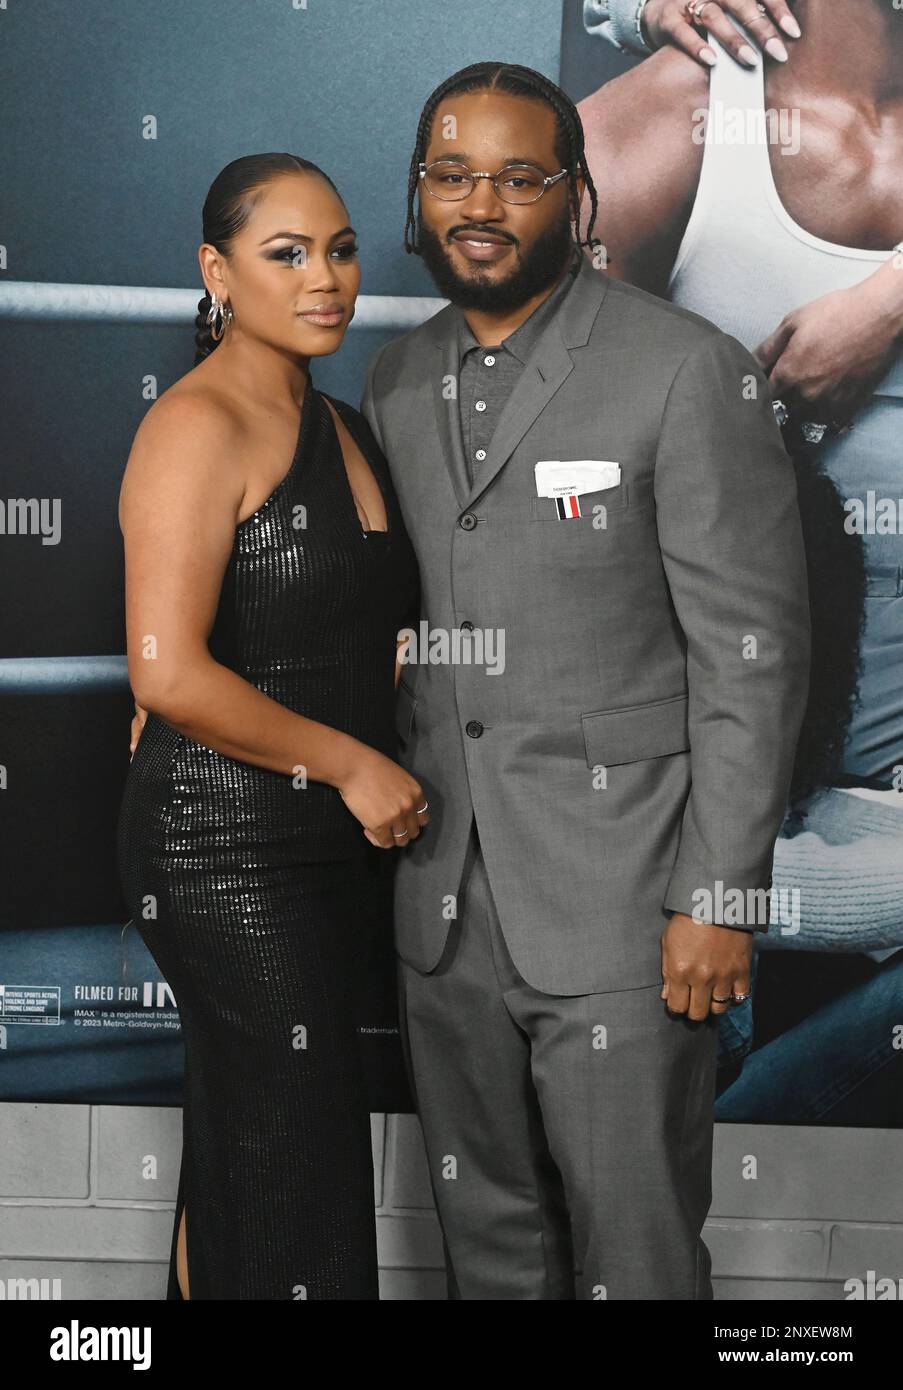 HOLLYWOOD, CALIFORNIA - FEBRUARY 27: (L-R) Zinzi Coogler and Ryan Coogler attend the Los Angeles Premiere of 'CREED III' at TCL Chinese Theatre on Feb Stock Photo